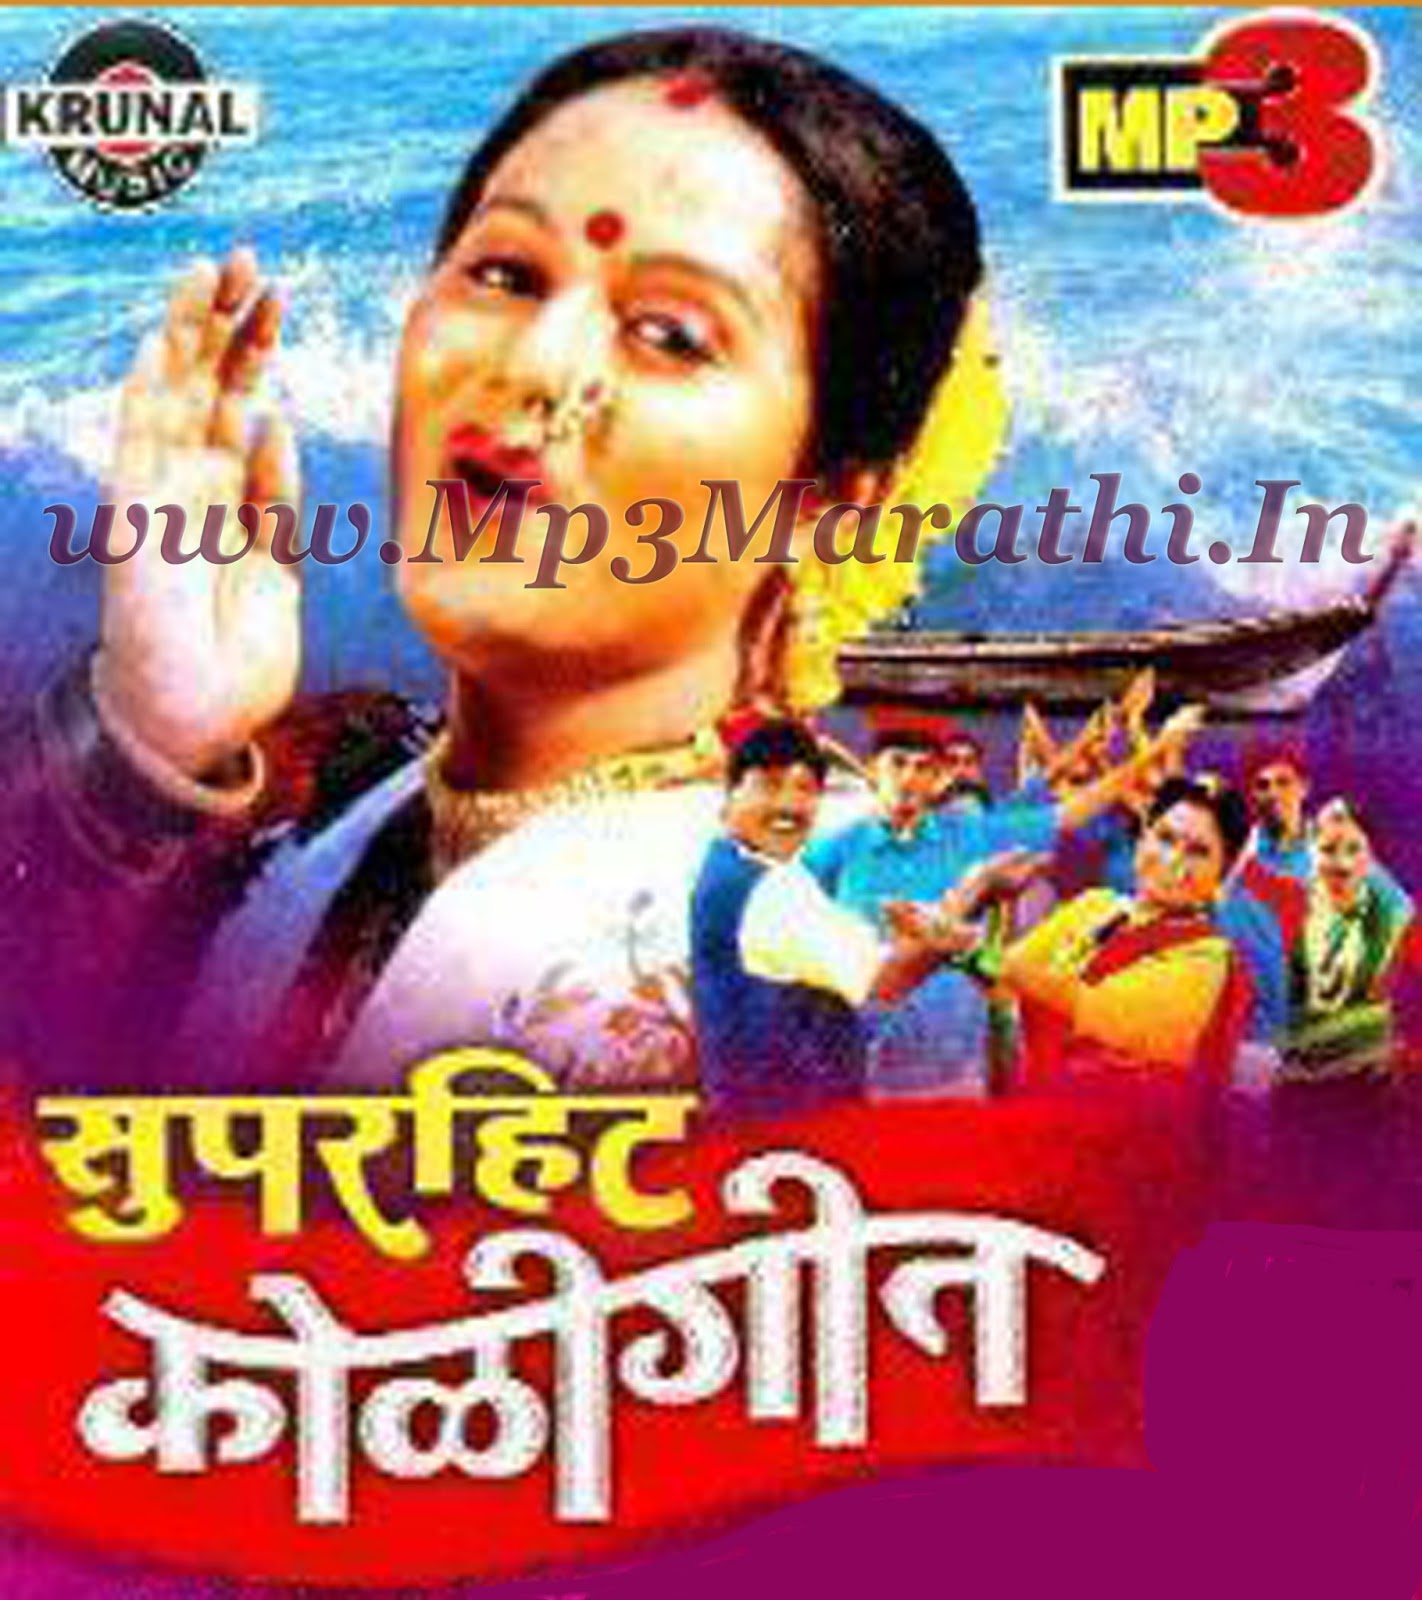 Vip marathi mp3 song free download